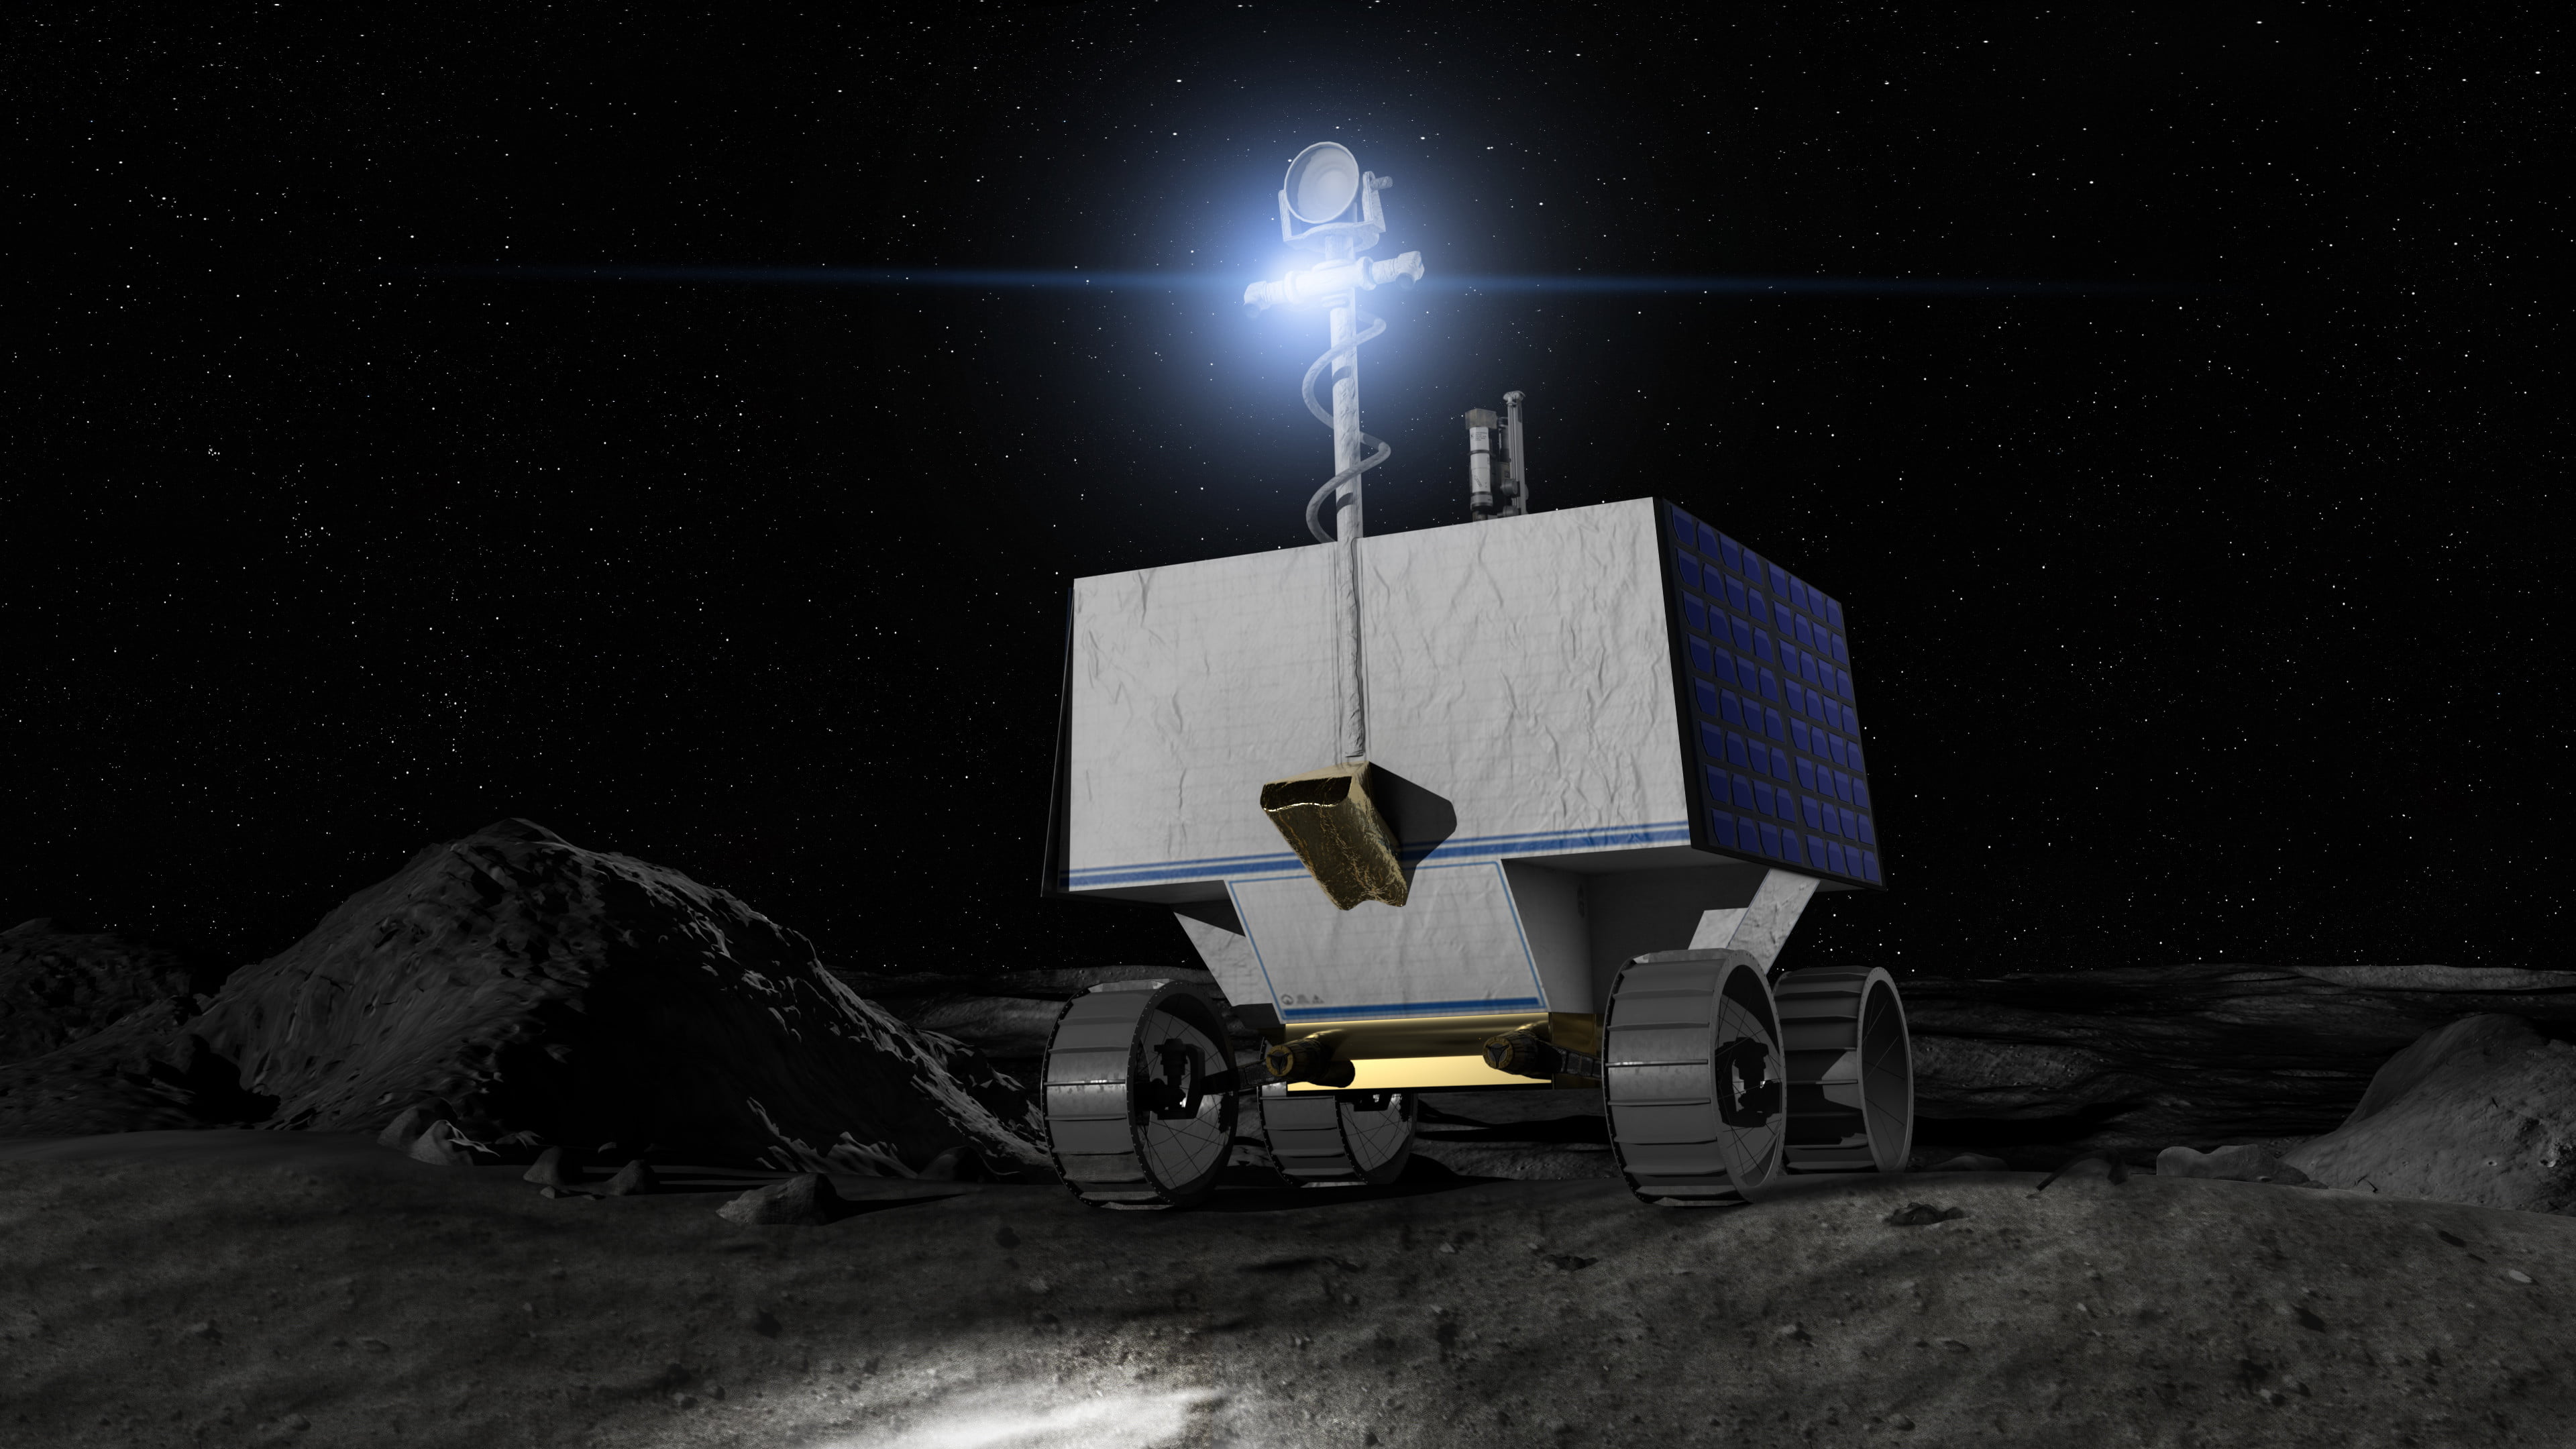 VIPER rover will brave the coldest regions of the moon to search for water